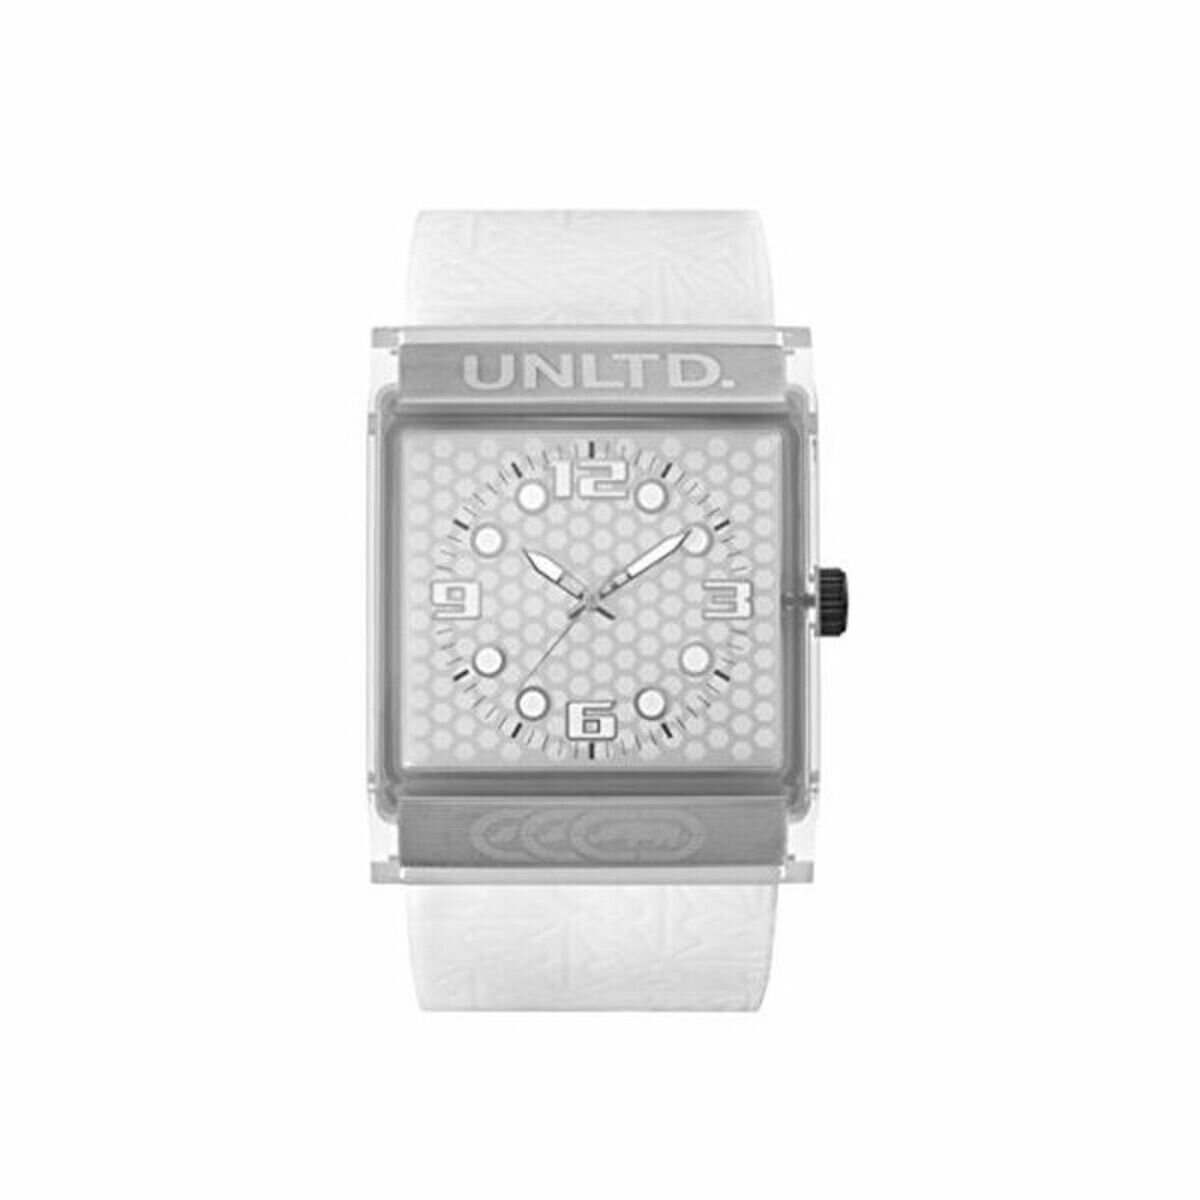 Mens Marc Ecko square faced watch